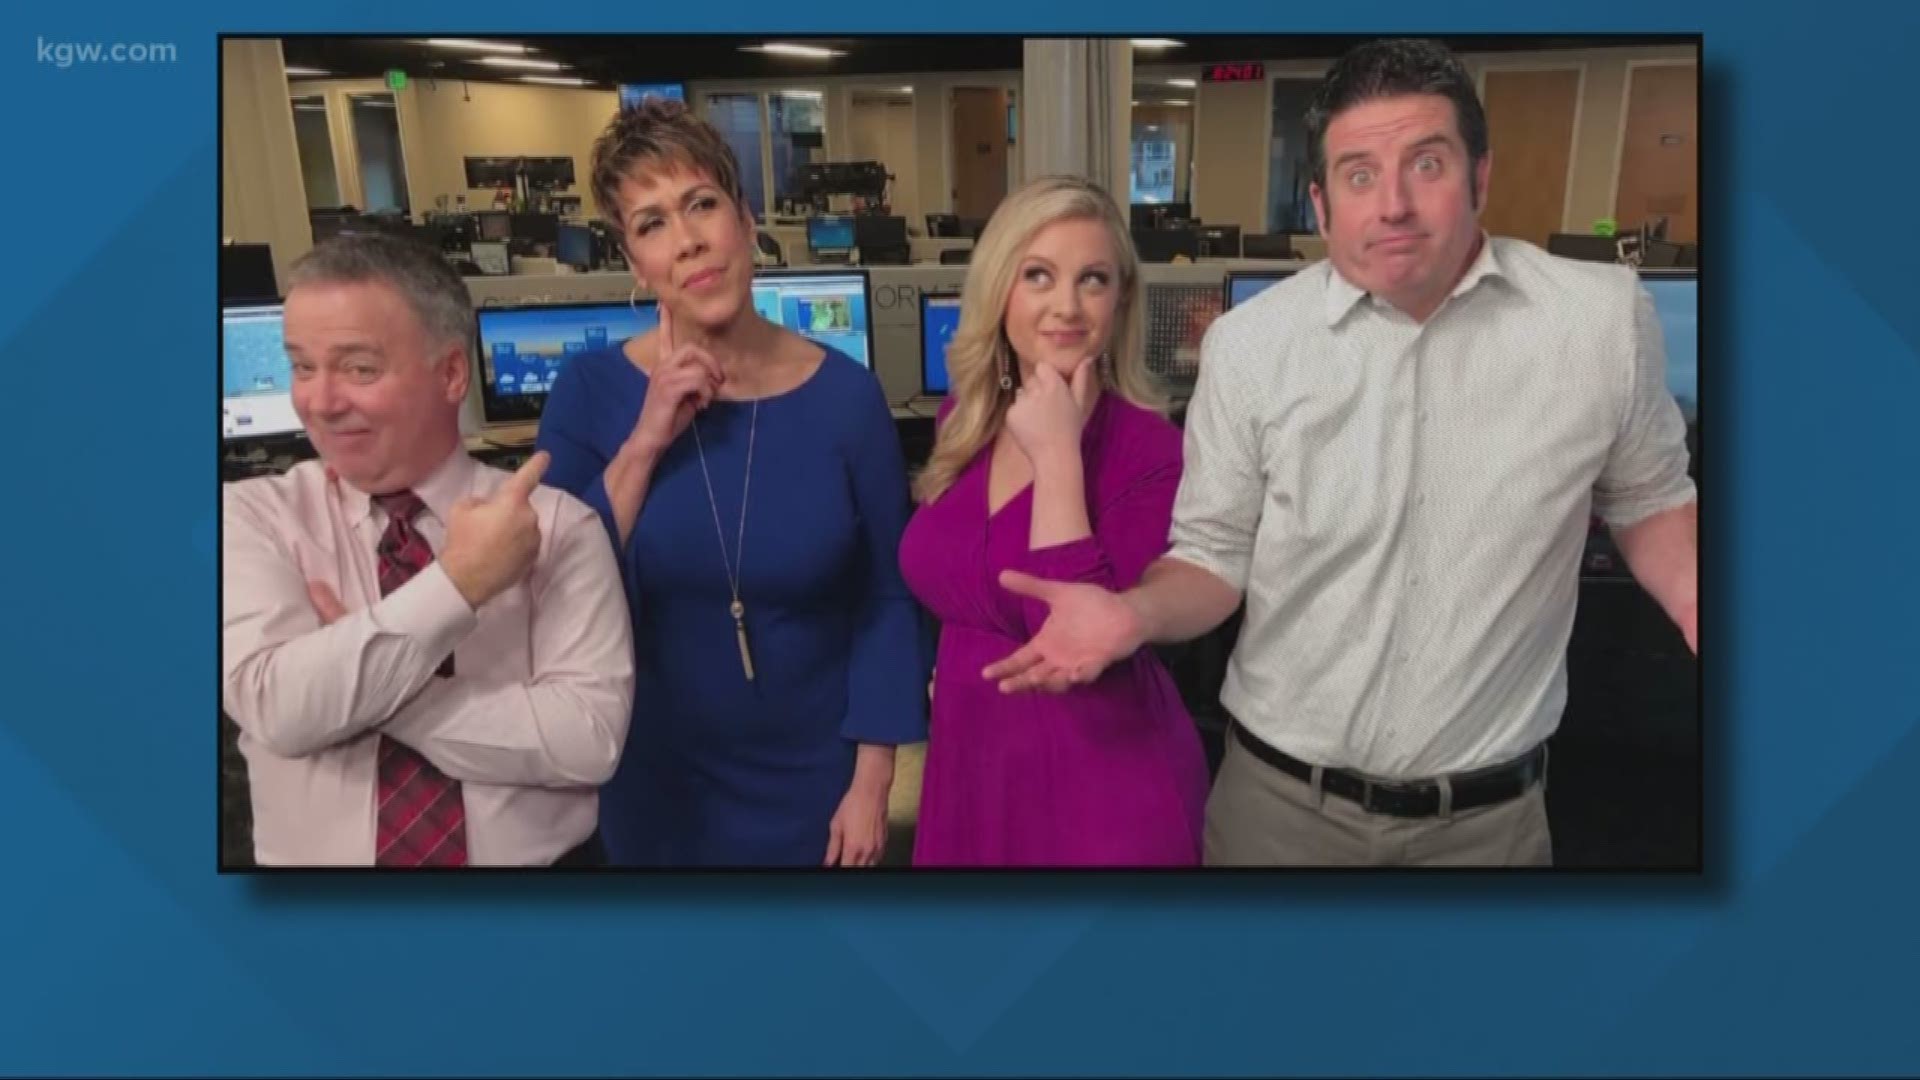 Best anchor moments of the week on the KGW Sunrise newscast